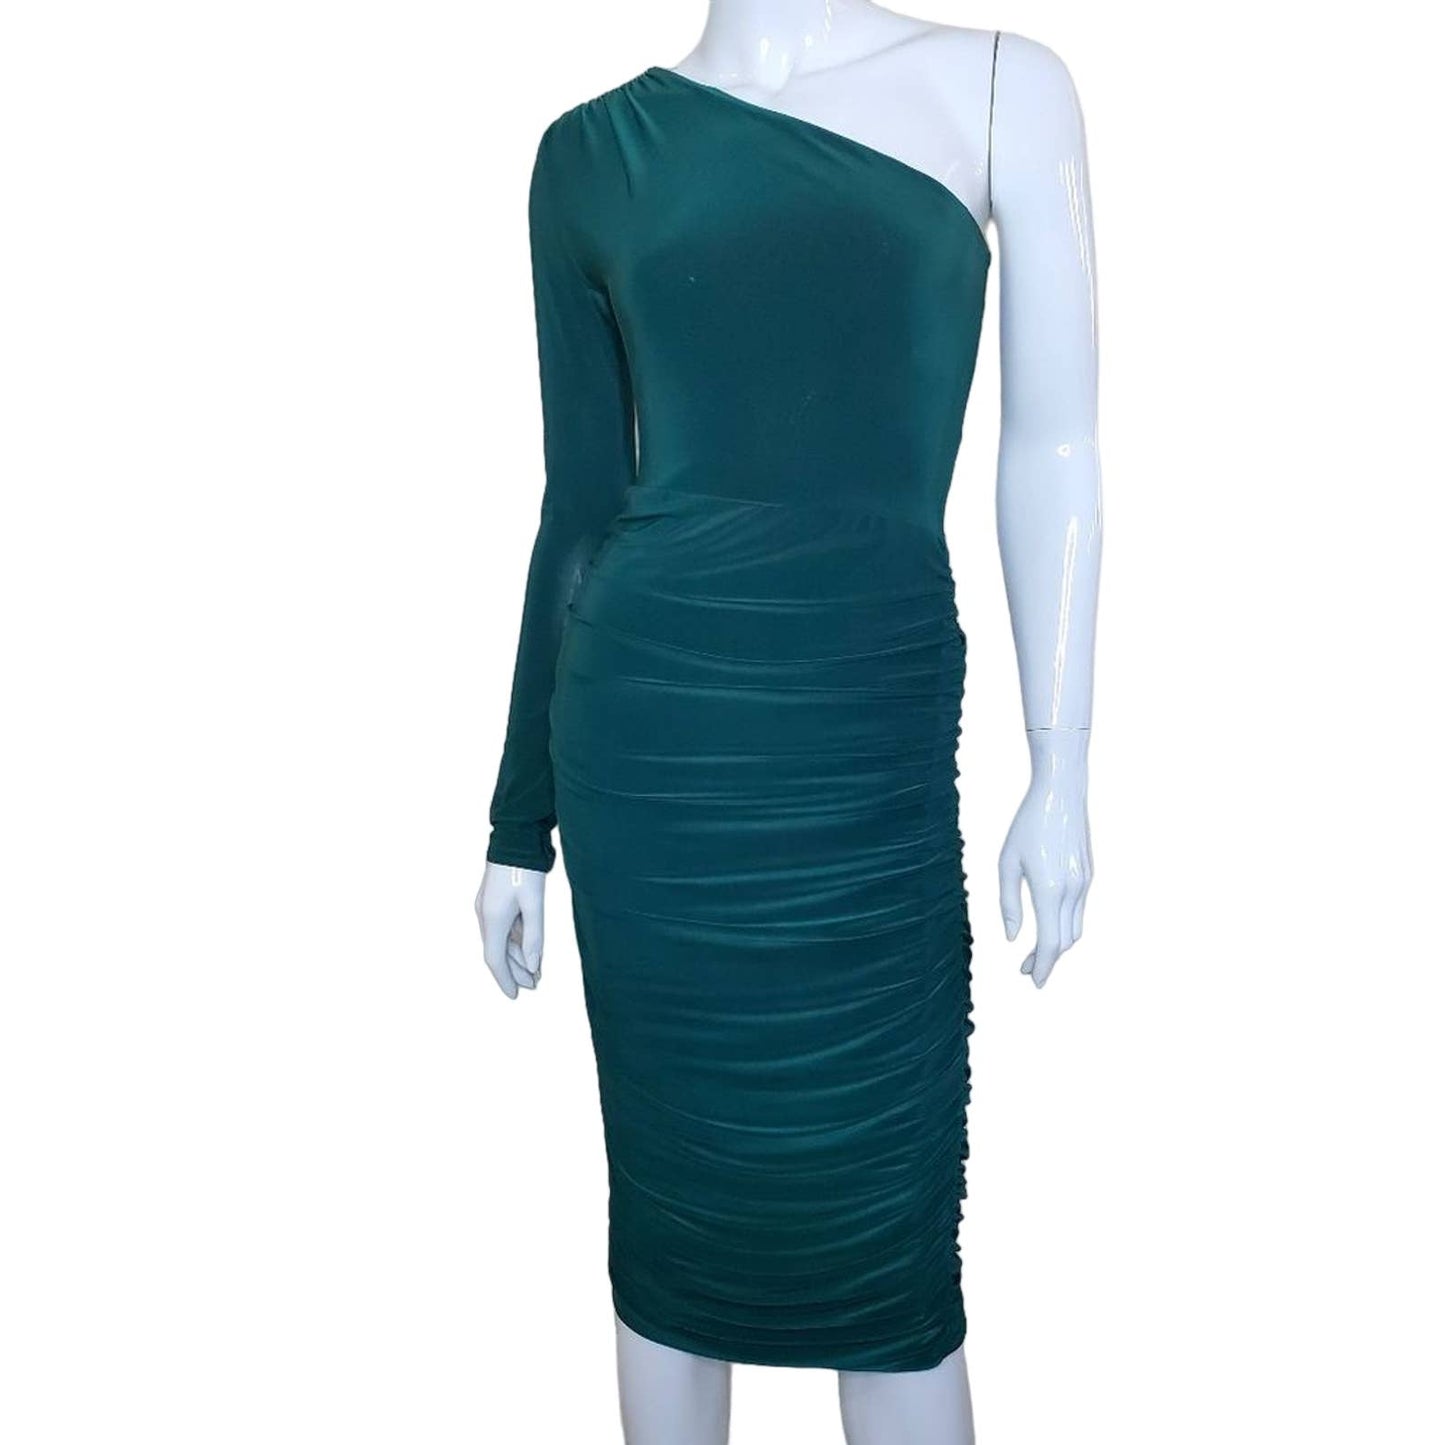 Femme Luxe Emerald Green One Shoulder Bodycon Midi Dress, Size UK6/US0